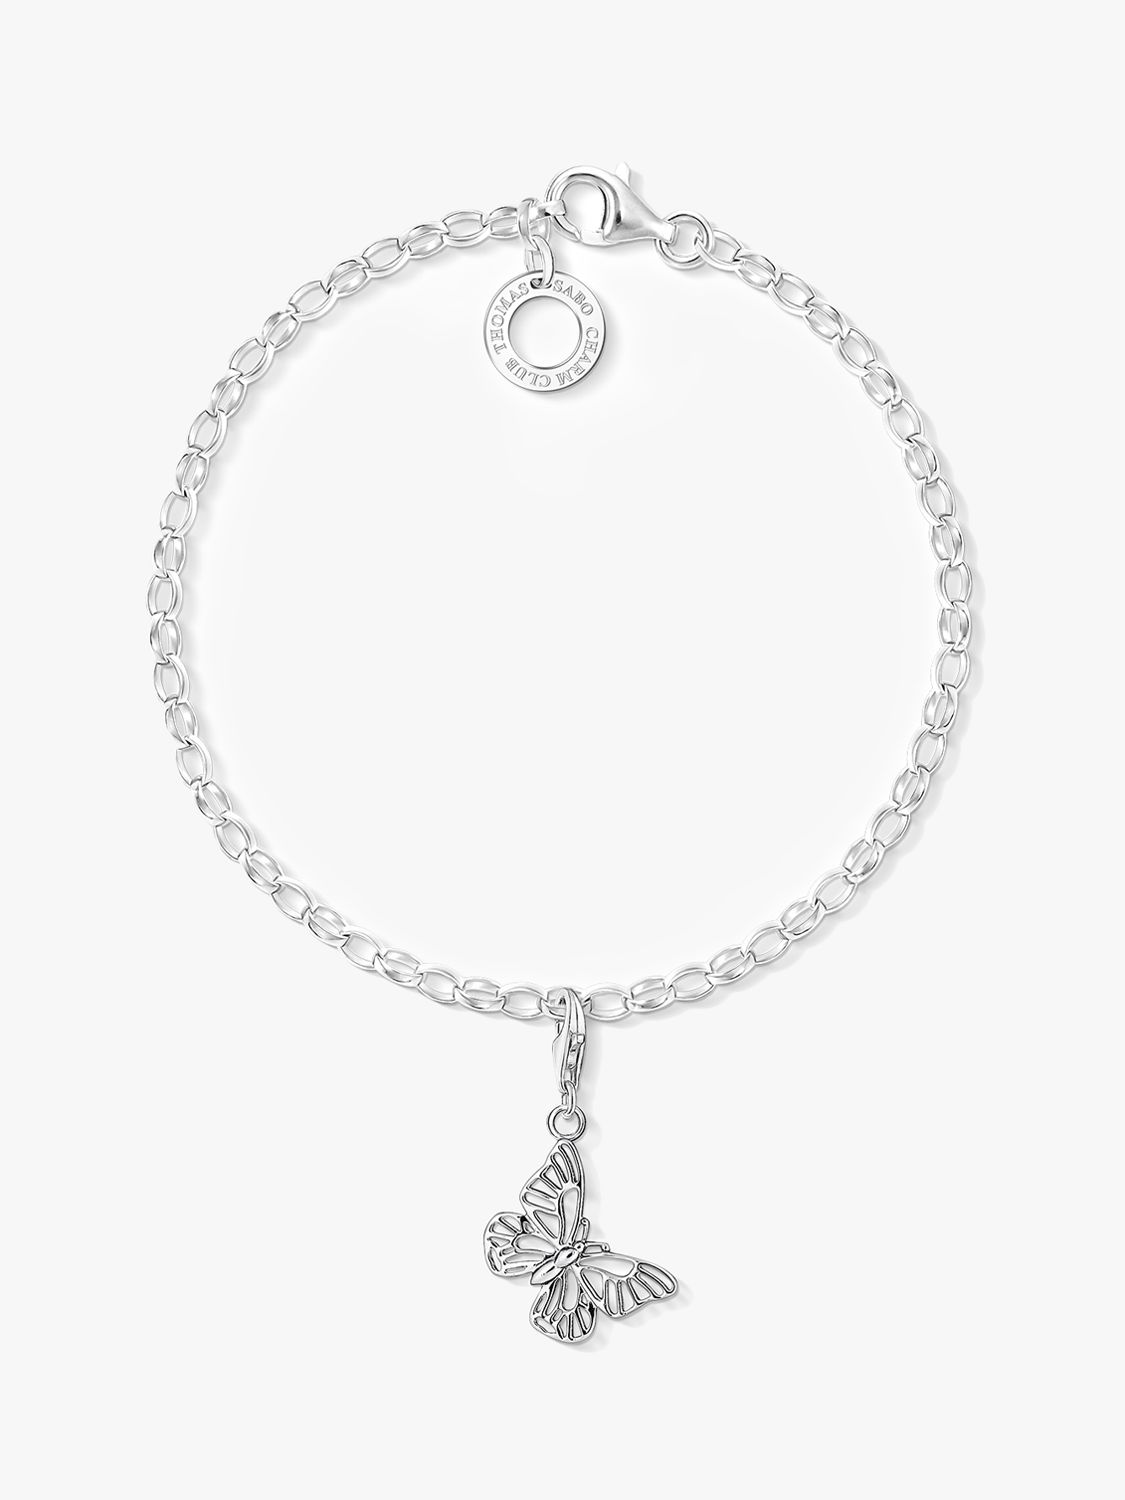 Buy THOMAS SABO Charm Club Fine Sterling Silver Chain Bracelet, Silver Online at johnlewis.com